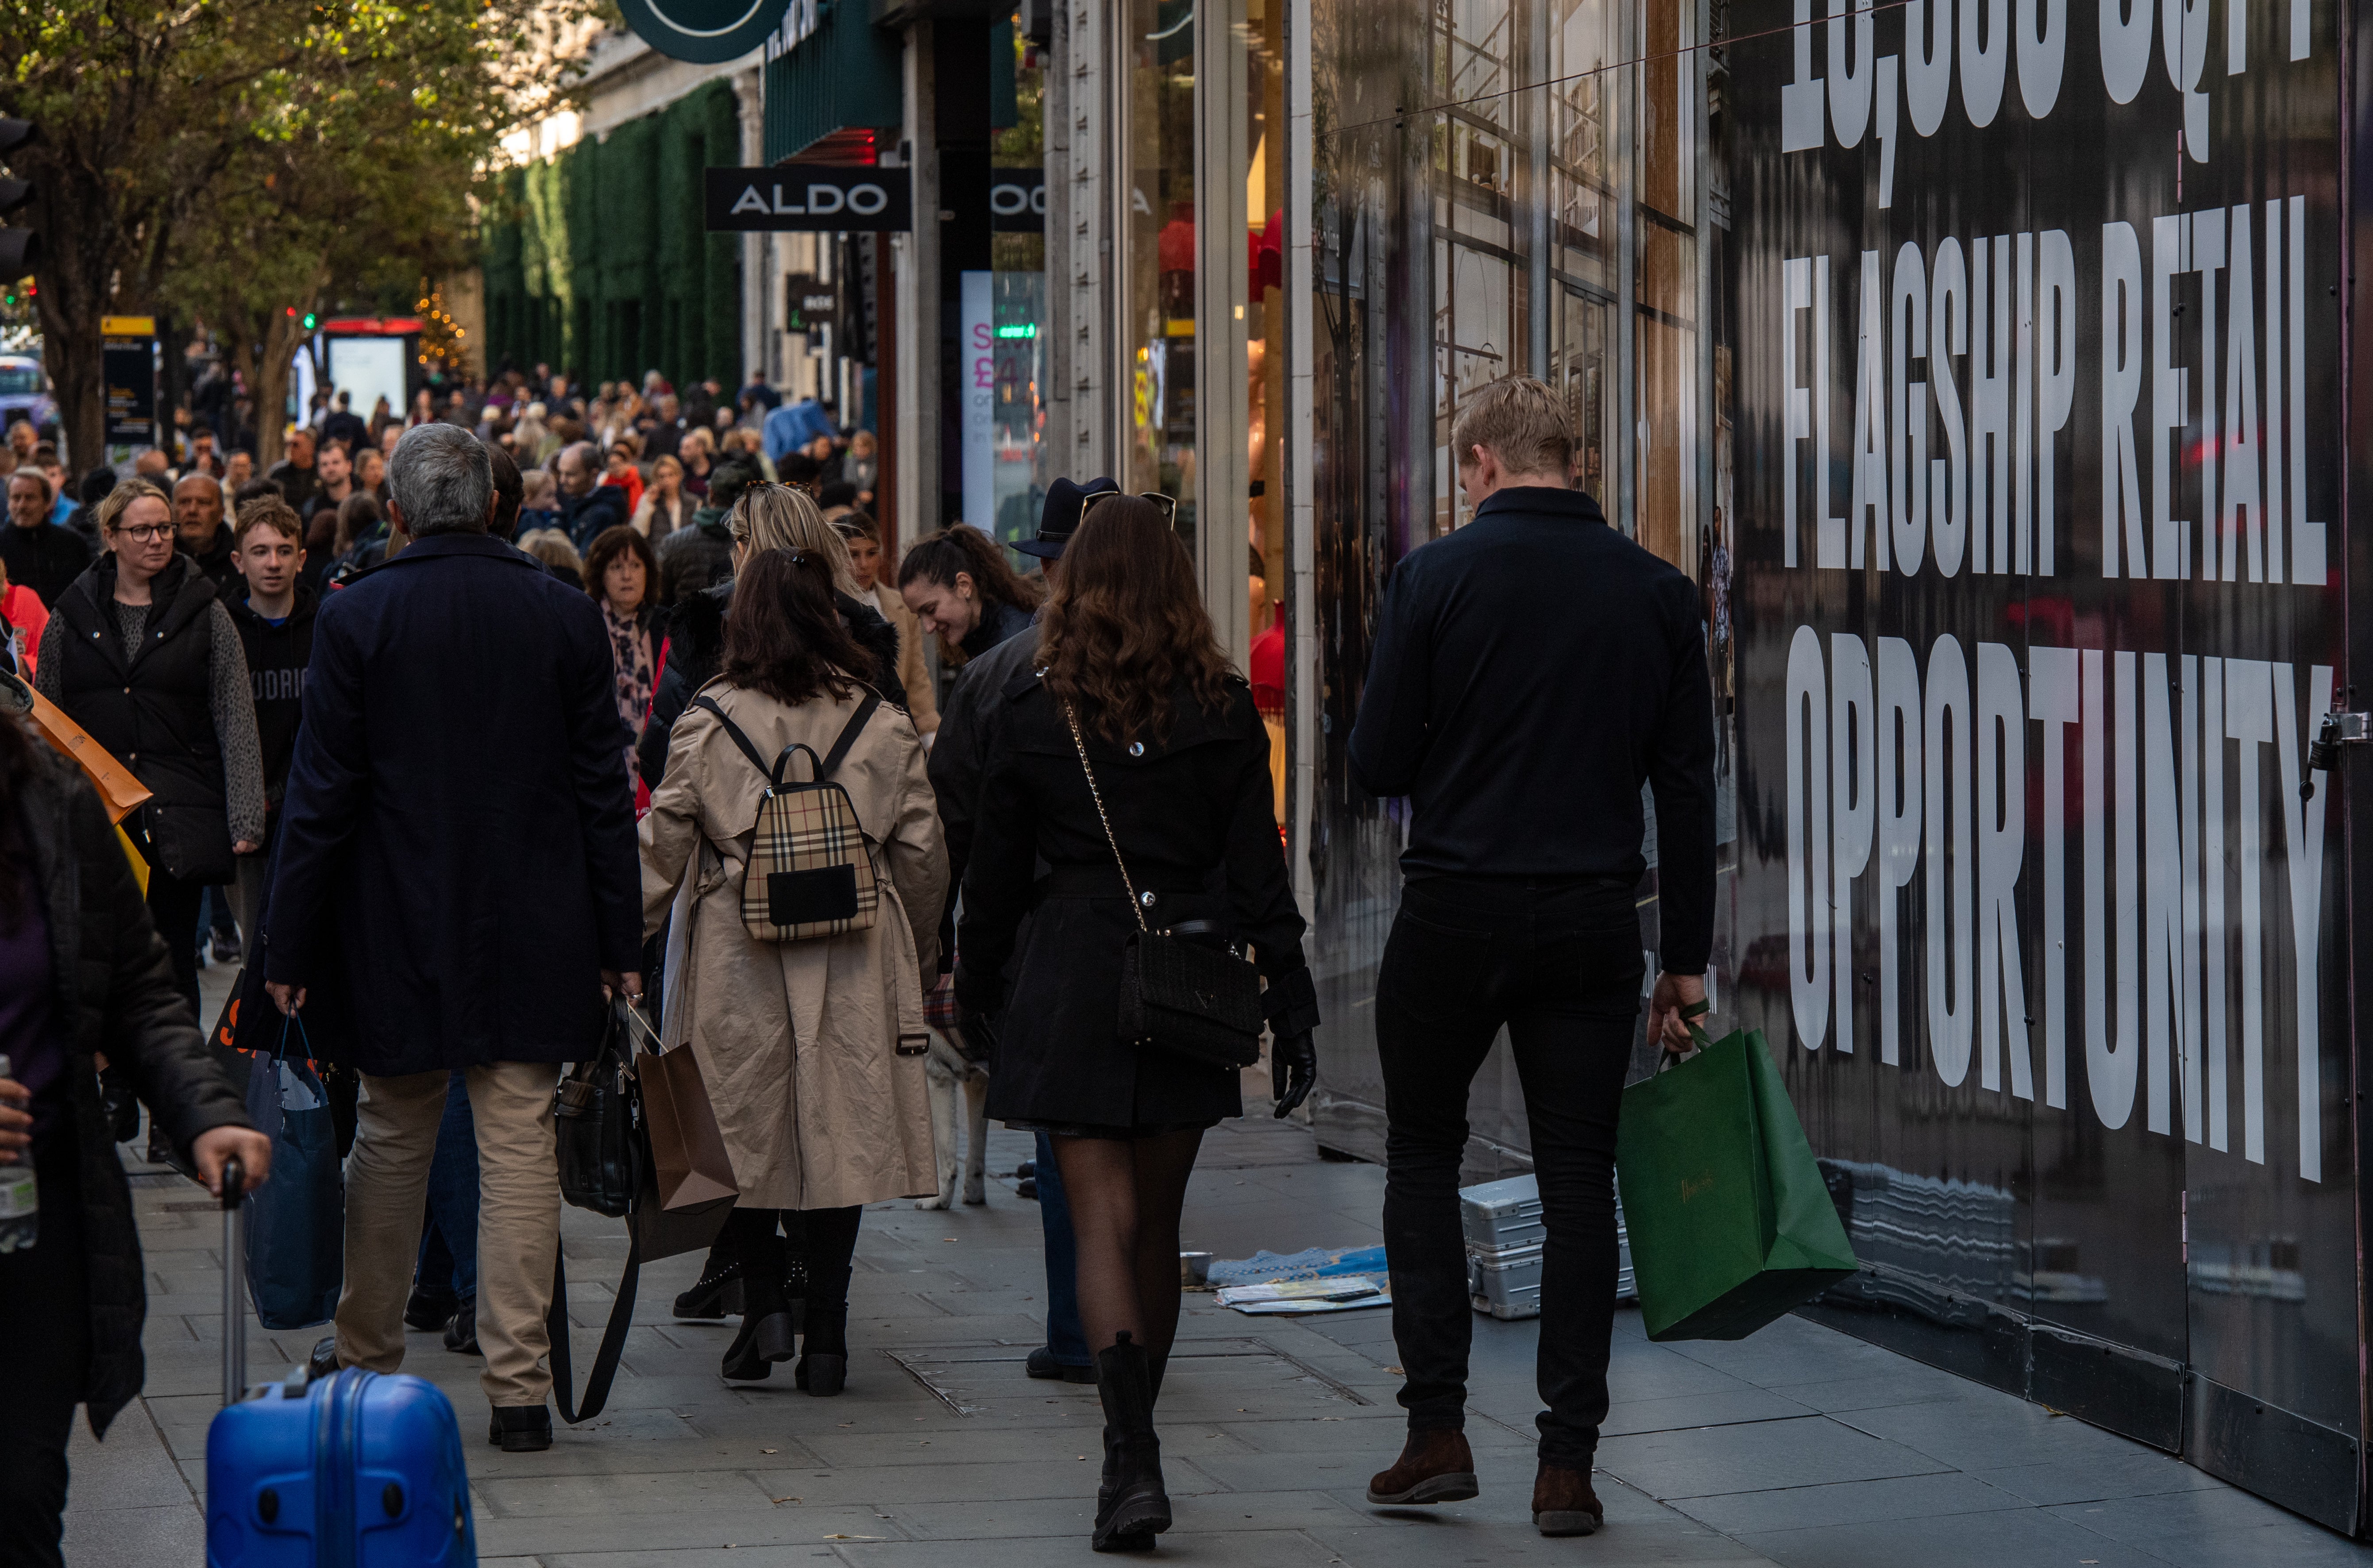 Retail footfall dropped 12 per cent in October compared to September